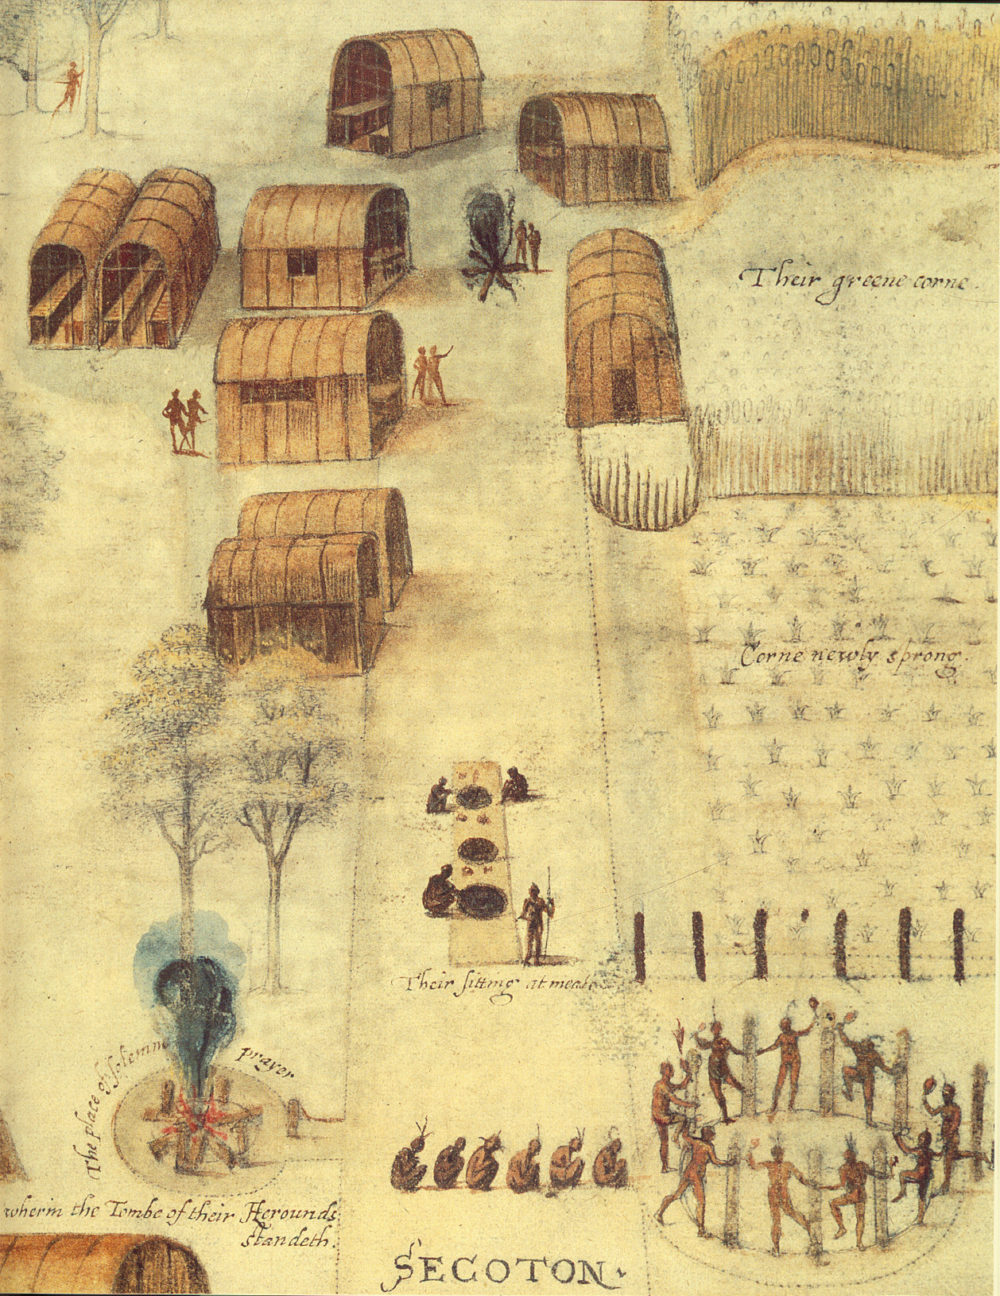 An early sketch by settler John White of Native Americans in Virginia. Dancers are shown in a circle and others are sitting in a line. A fire is off to the left.